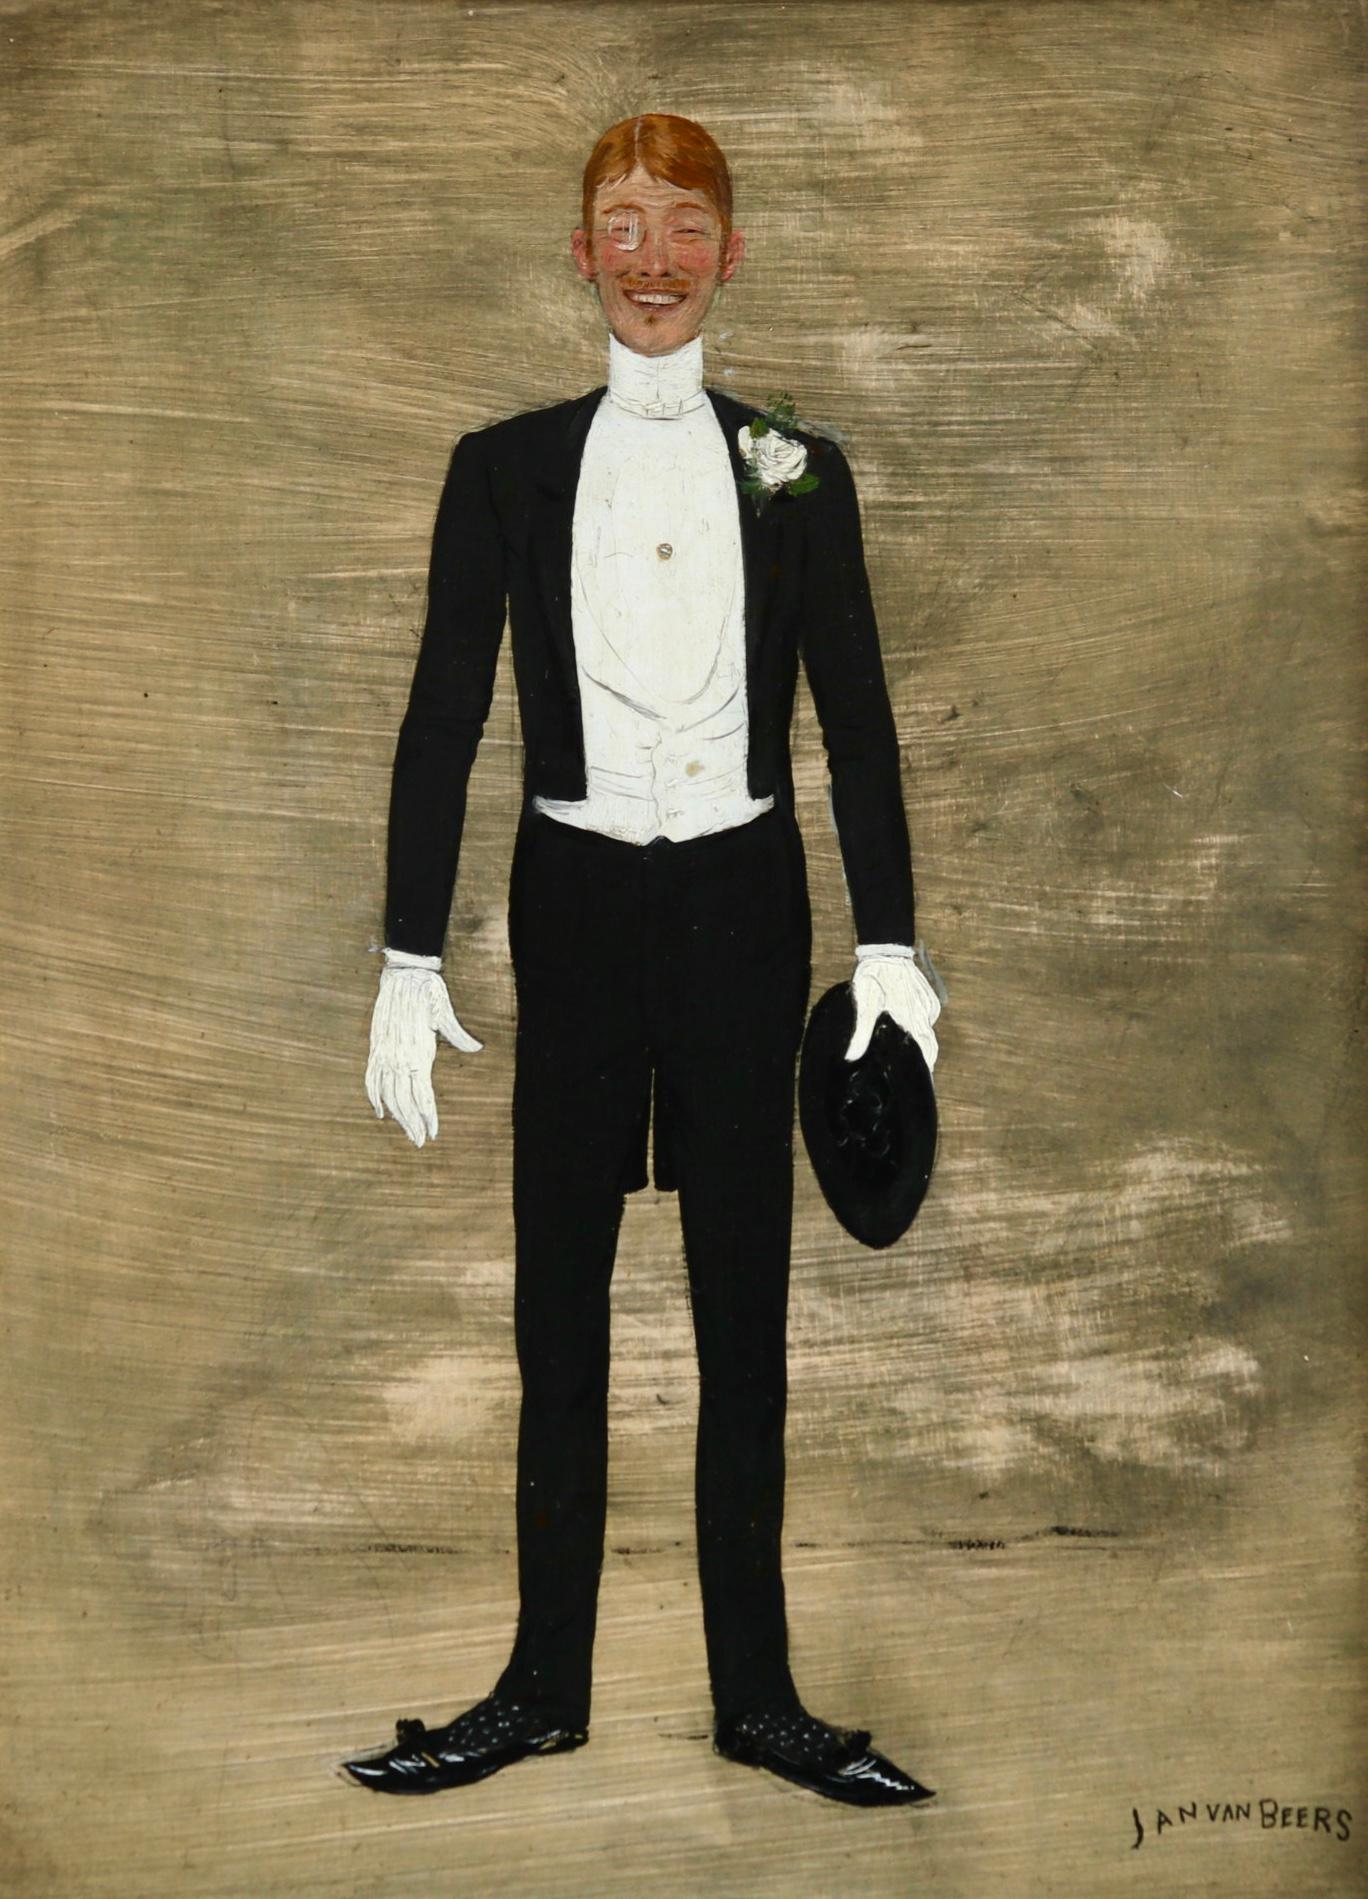 Oil on panel by Belgian painter Jan Van Beers depicting a smiling, elegant gentleman wearing a tuxedo with tails, wearing a monocle and holding a hat in his left hand. Signed lower right. Framed dimensions are 21.5 inches high by 18 inches wide.